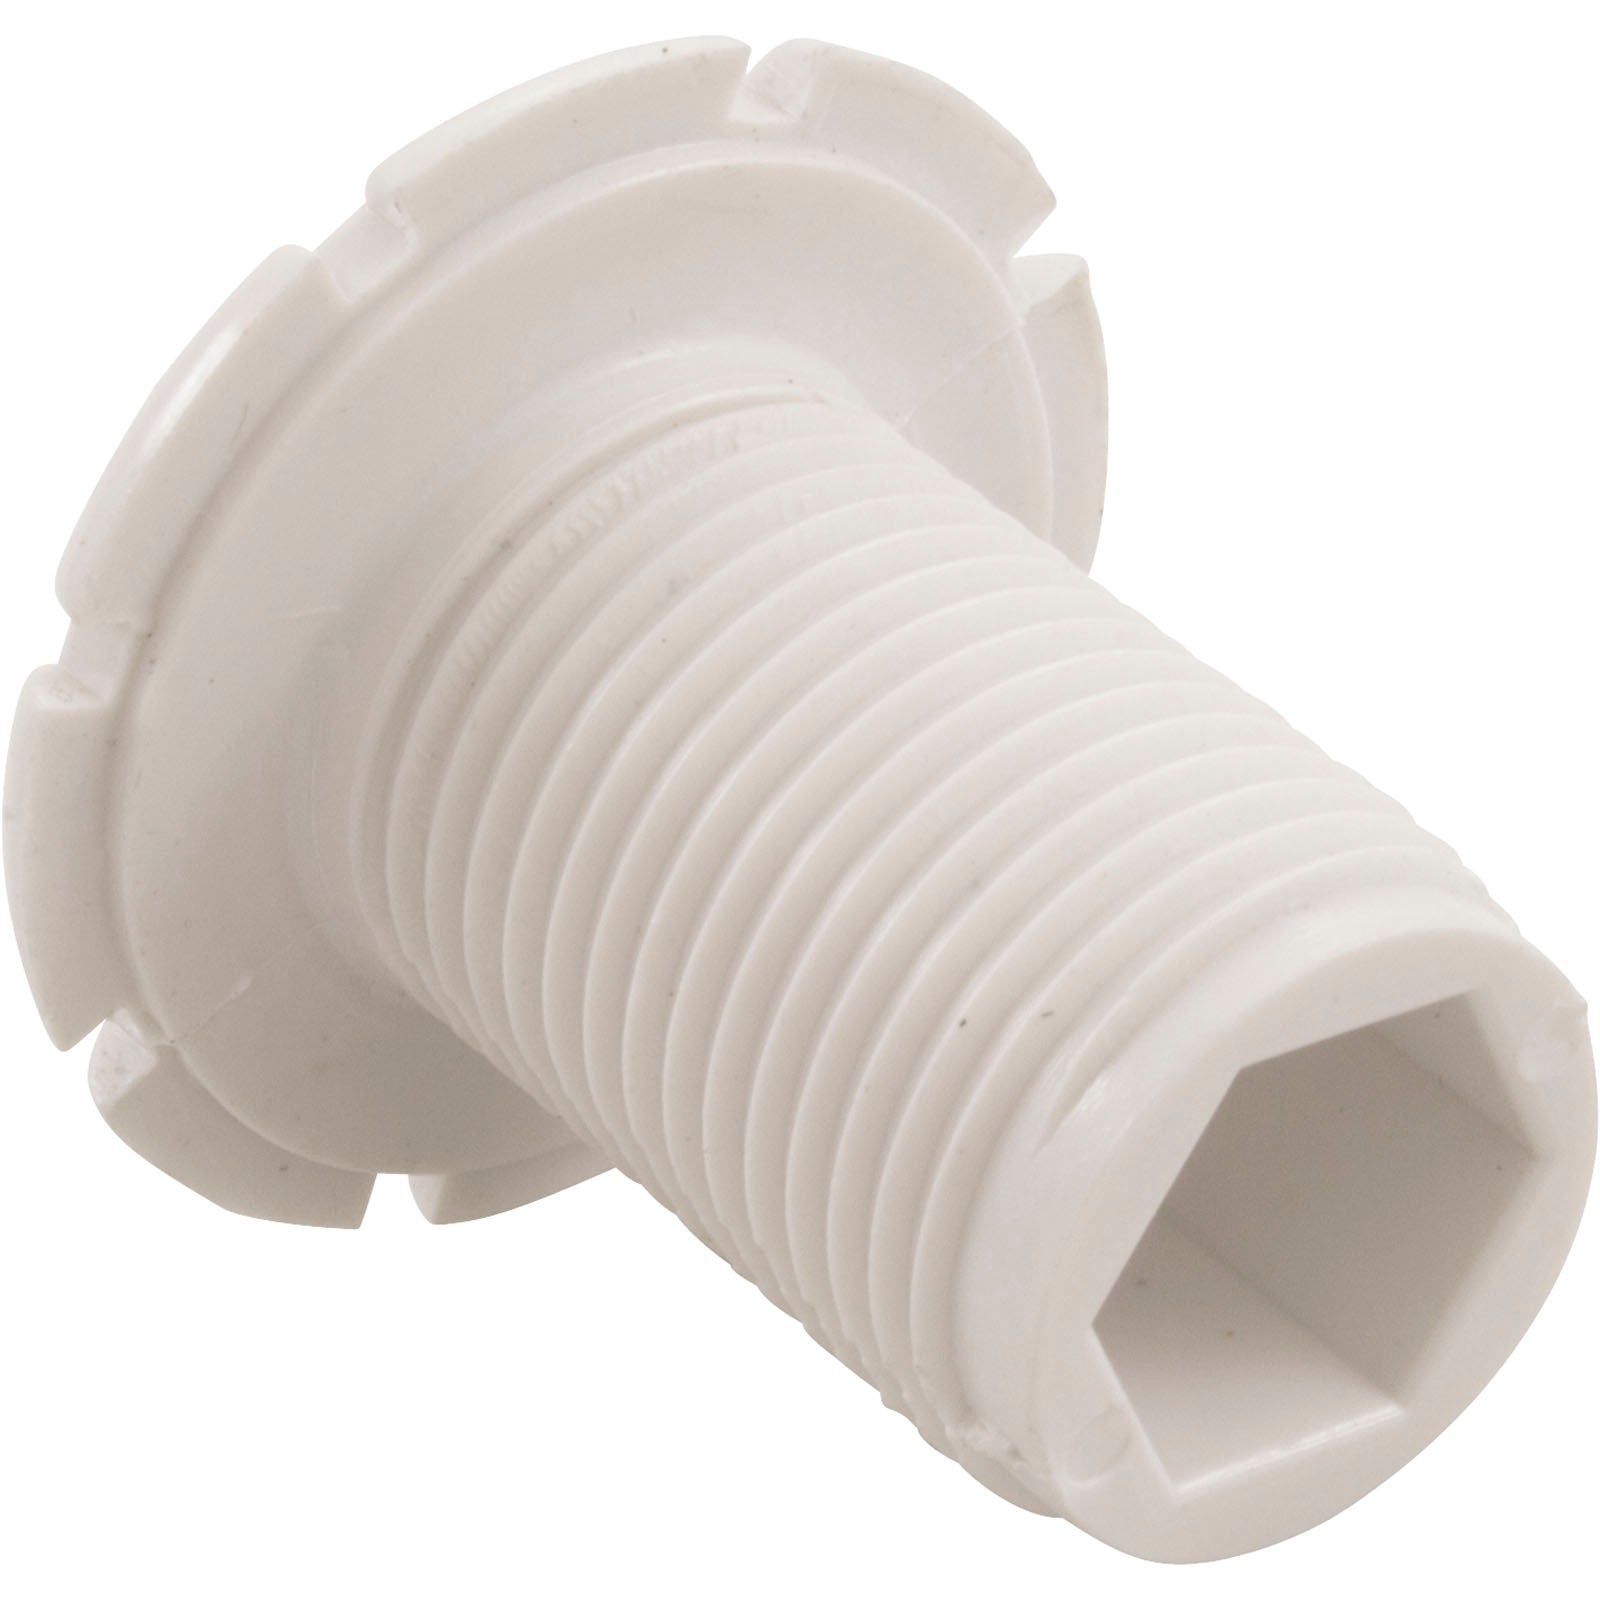 Waterway Air injector Wall Fitting [White] (215-2150)